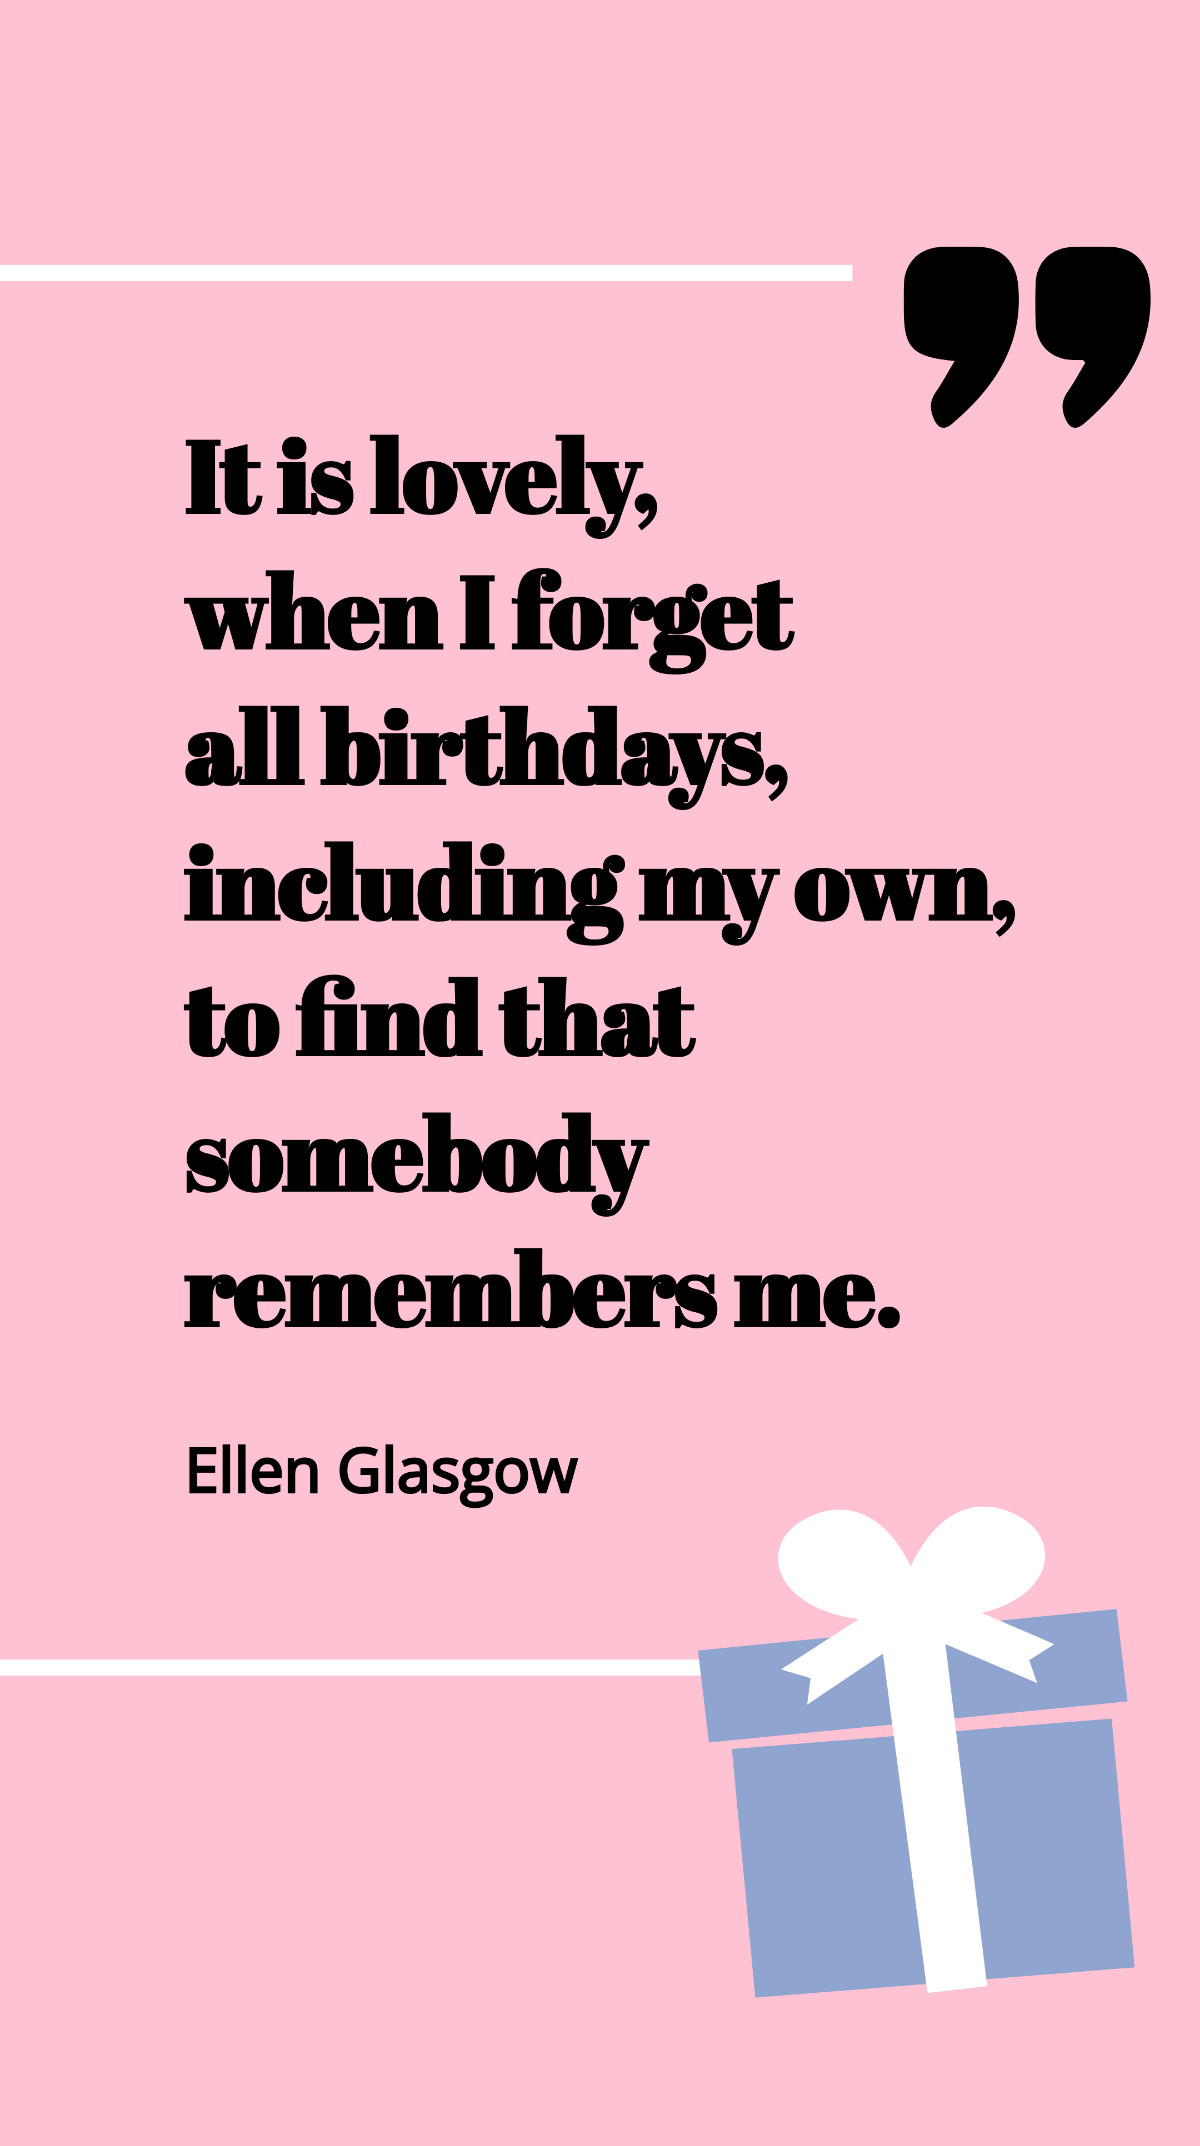 Ellen Glasgow - It is lovely, when I forget all birthdays, including my own, to find that somebody remembers me. Template